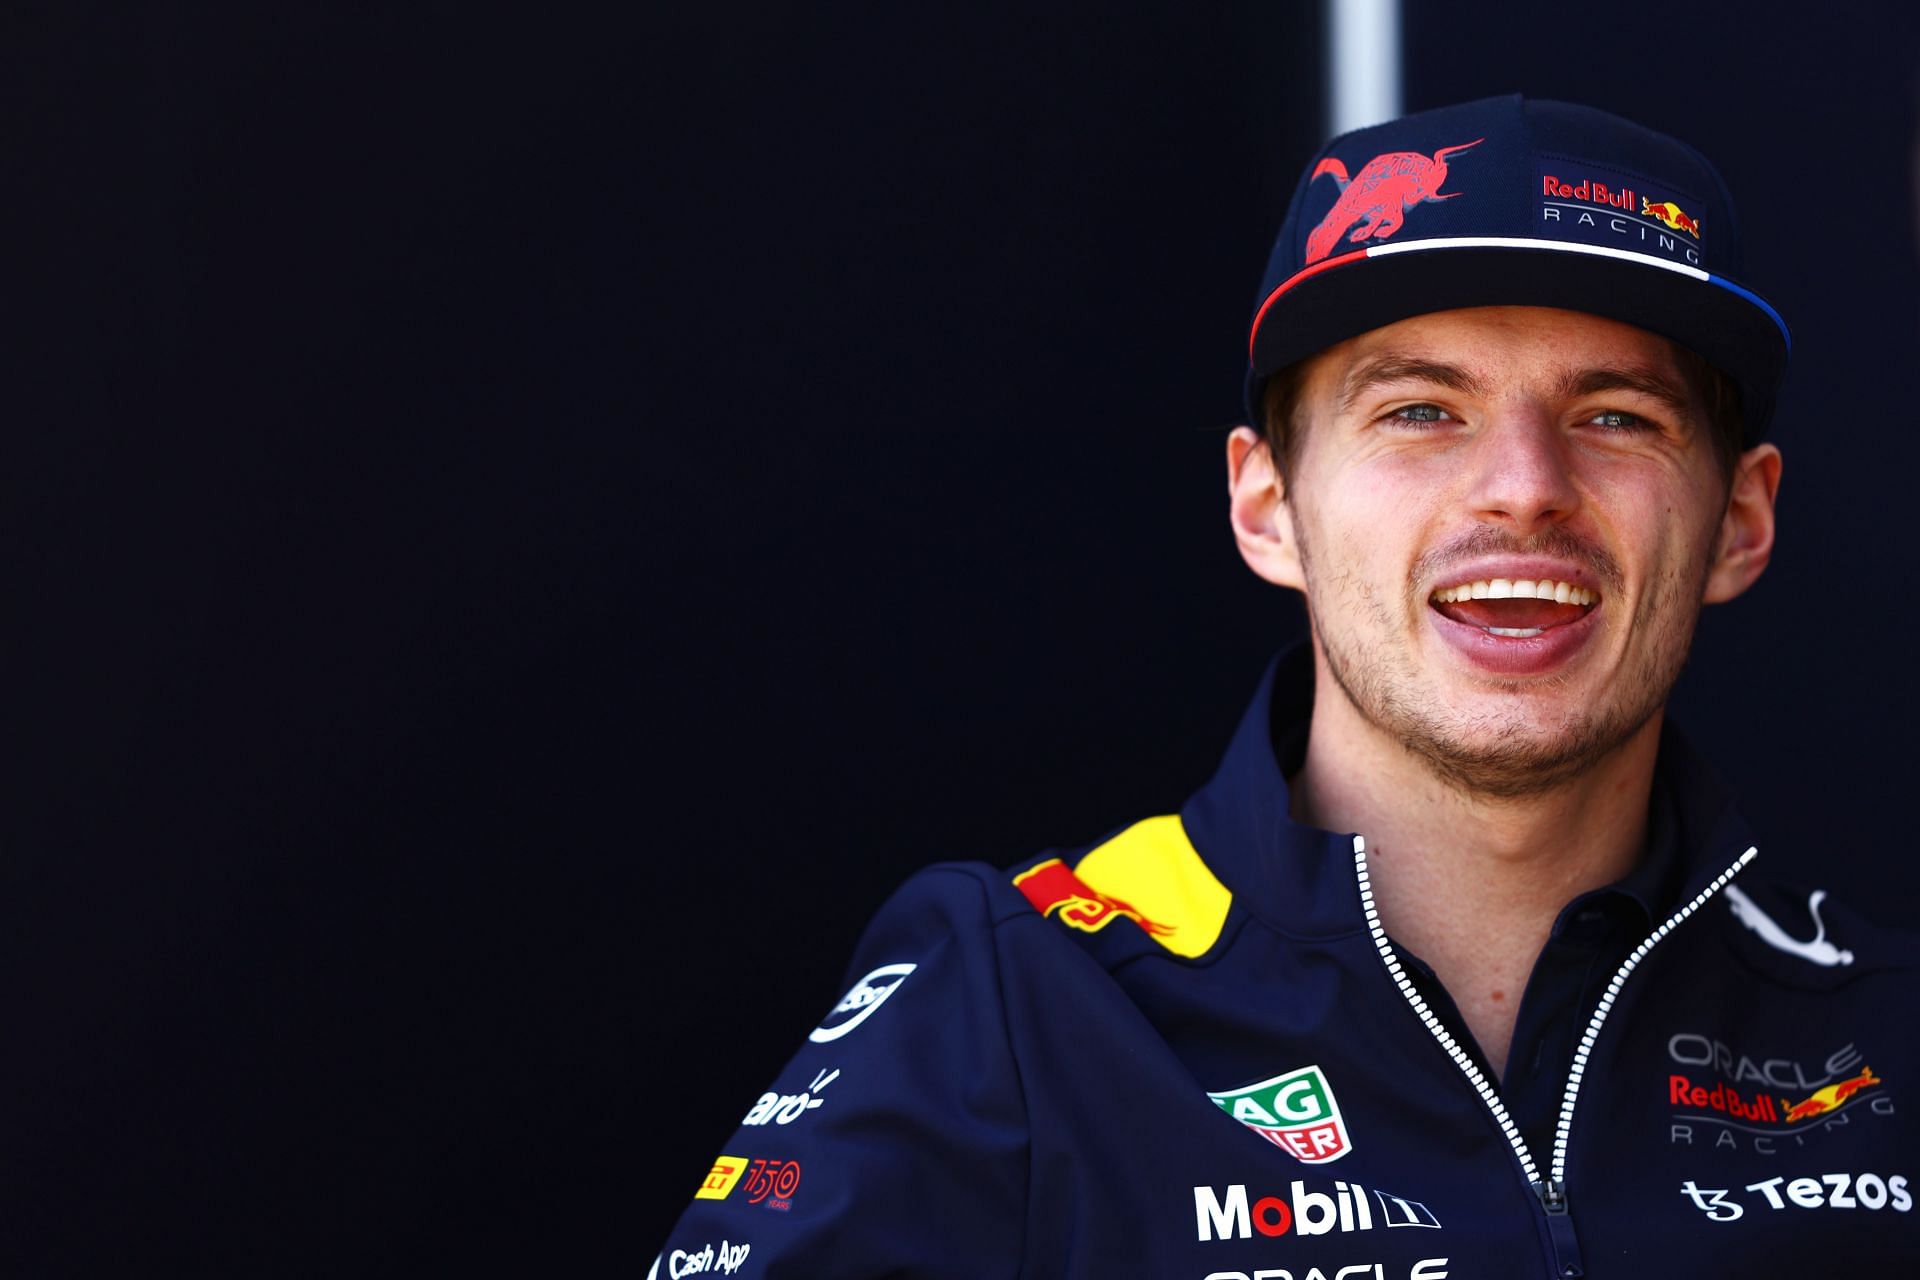 Max Verstappen begins the defense of his title in Bahrain this weekend